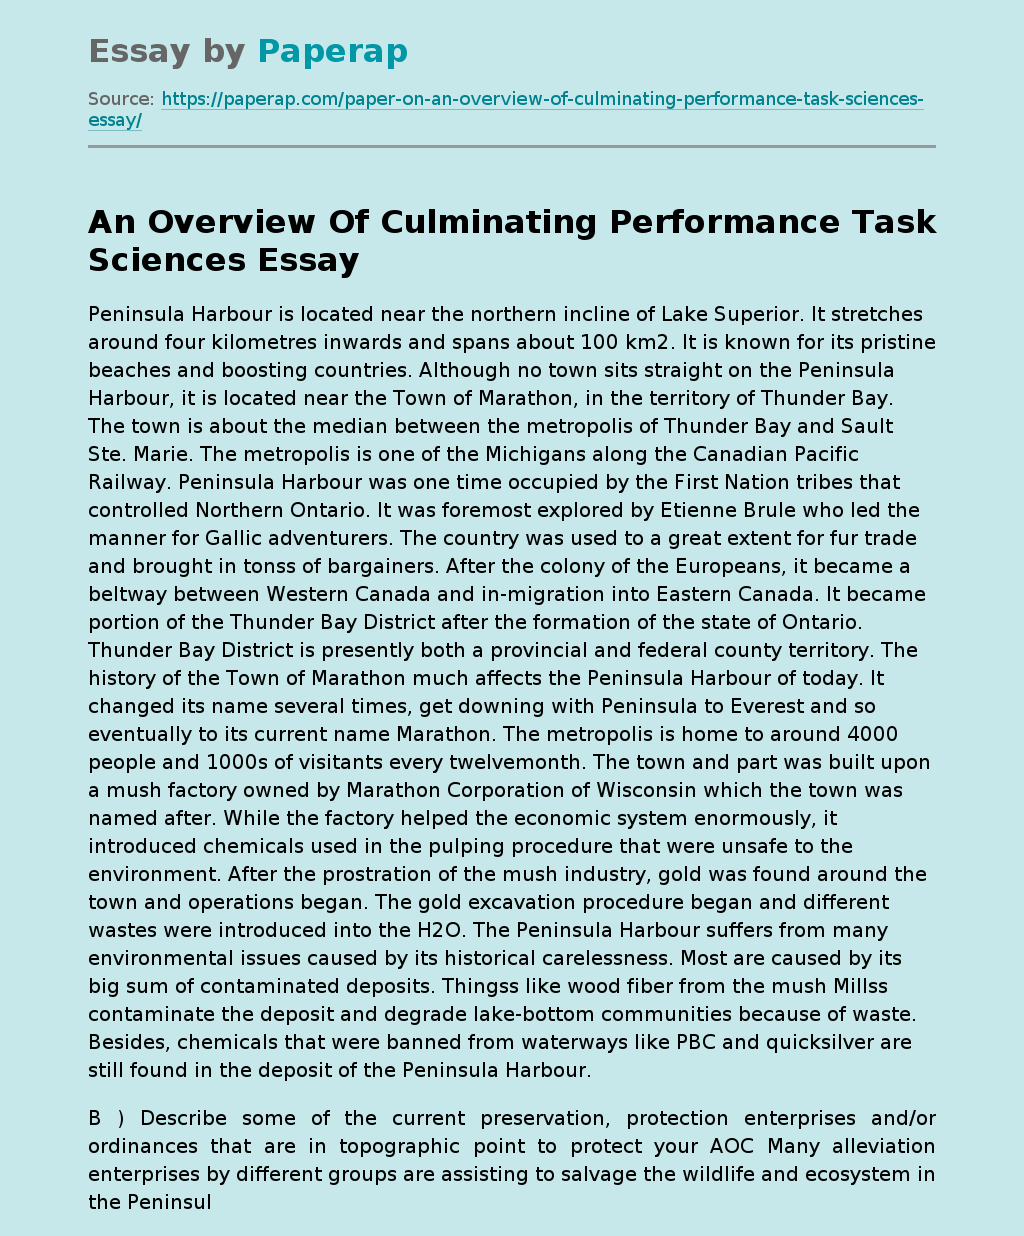 An Overview Of Culminating Performance Task Sciences